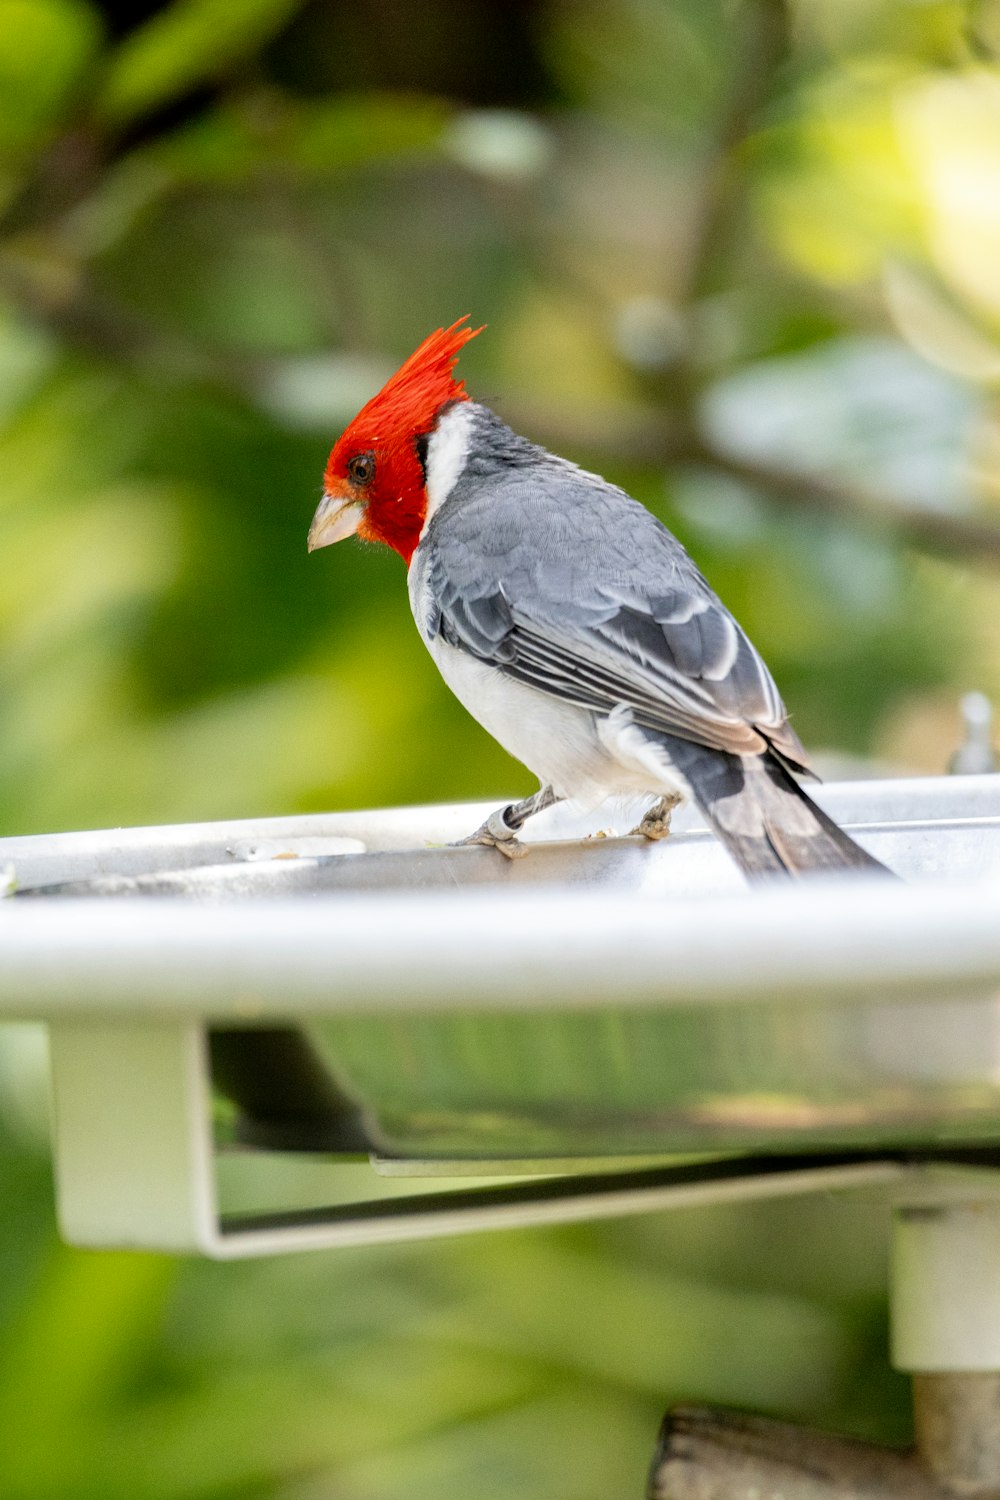 a bird with a red head sitting on a window sill